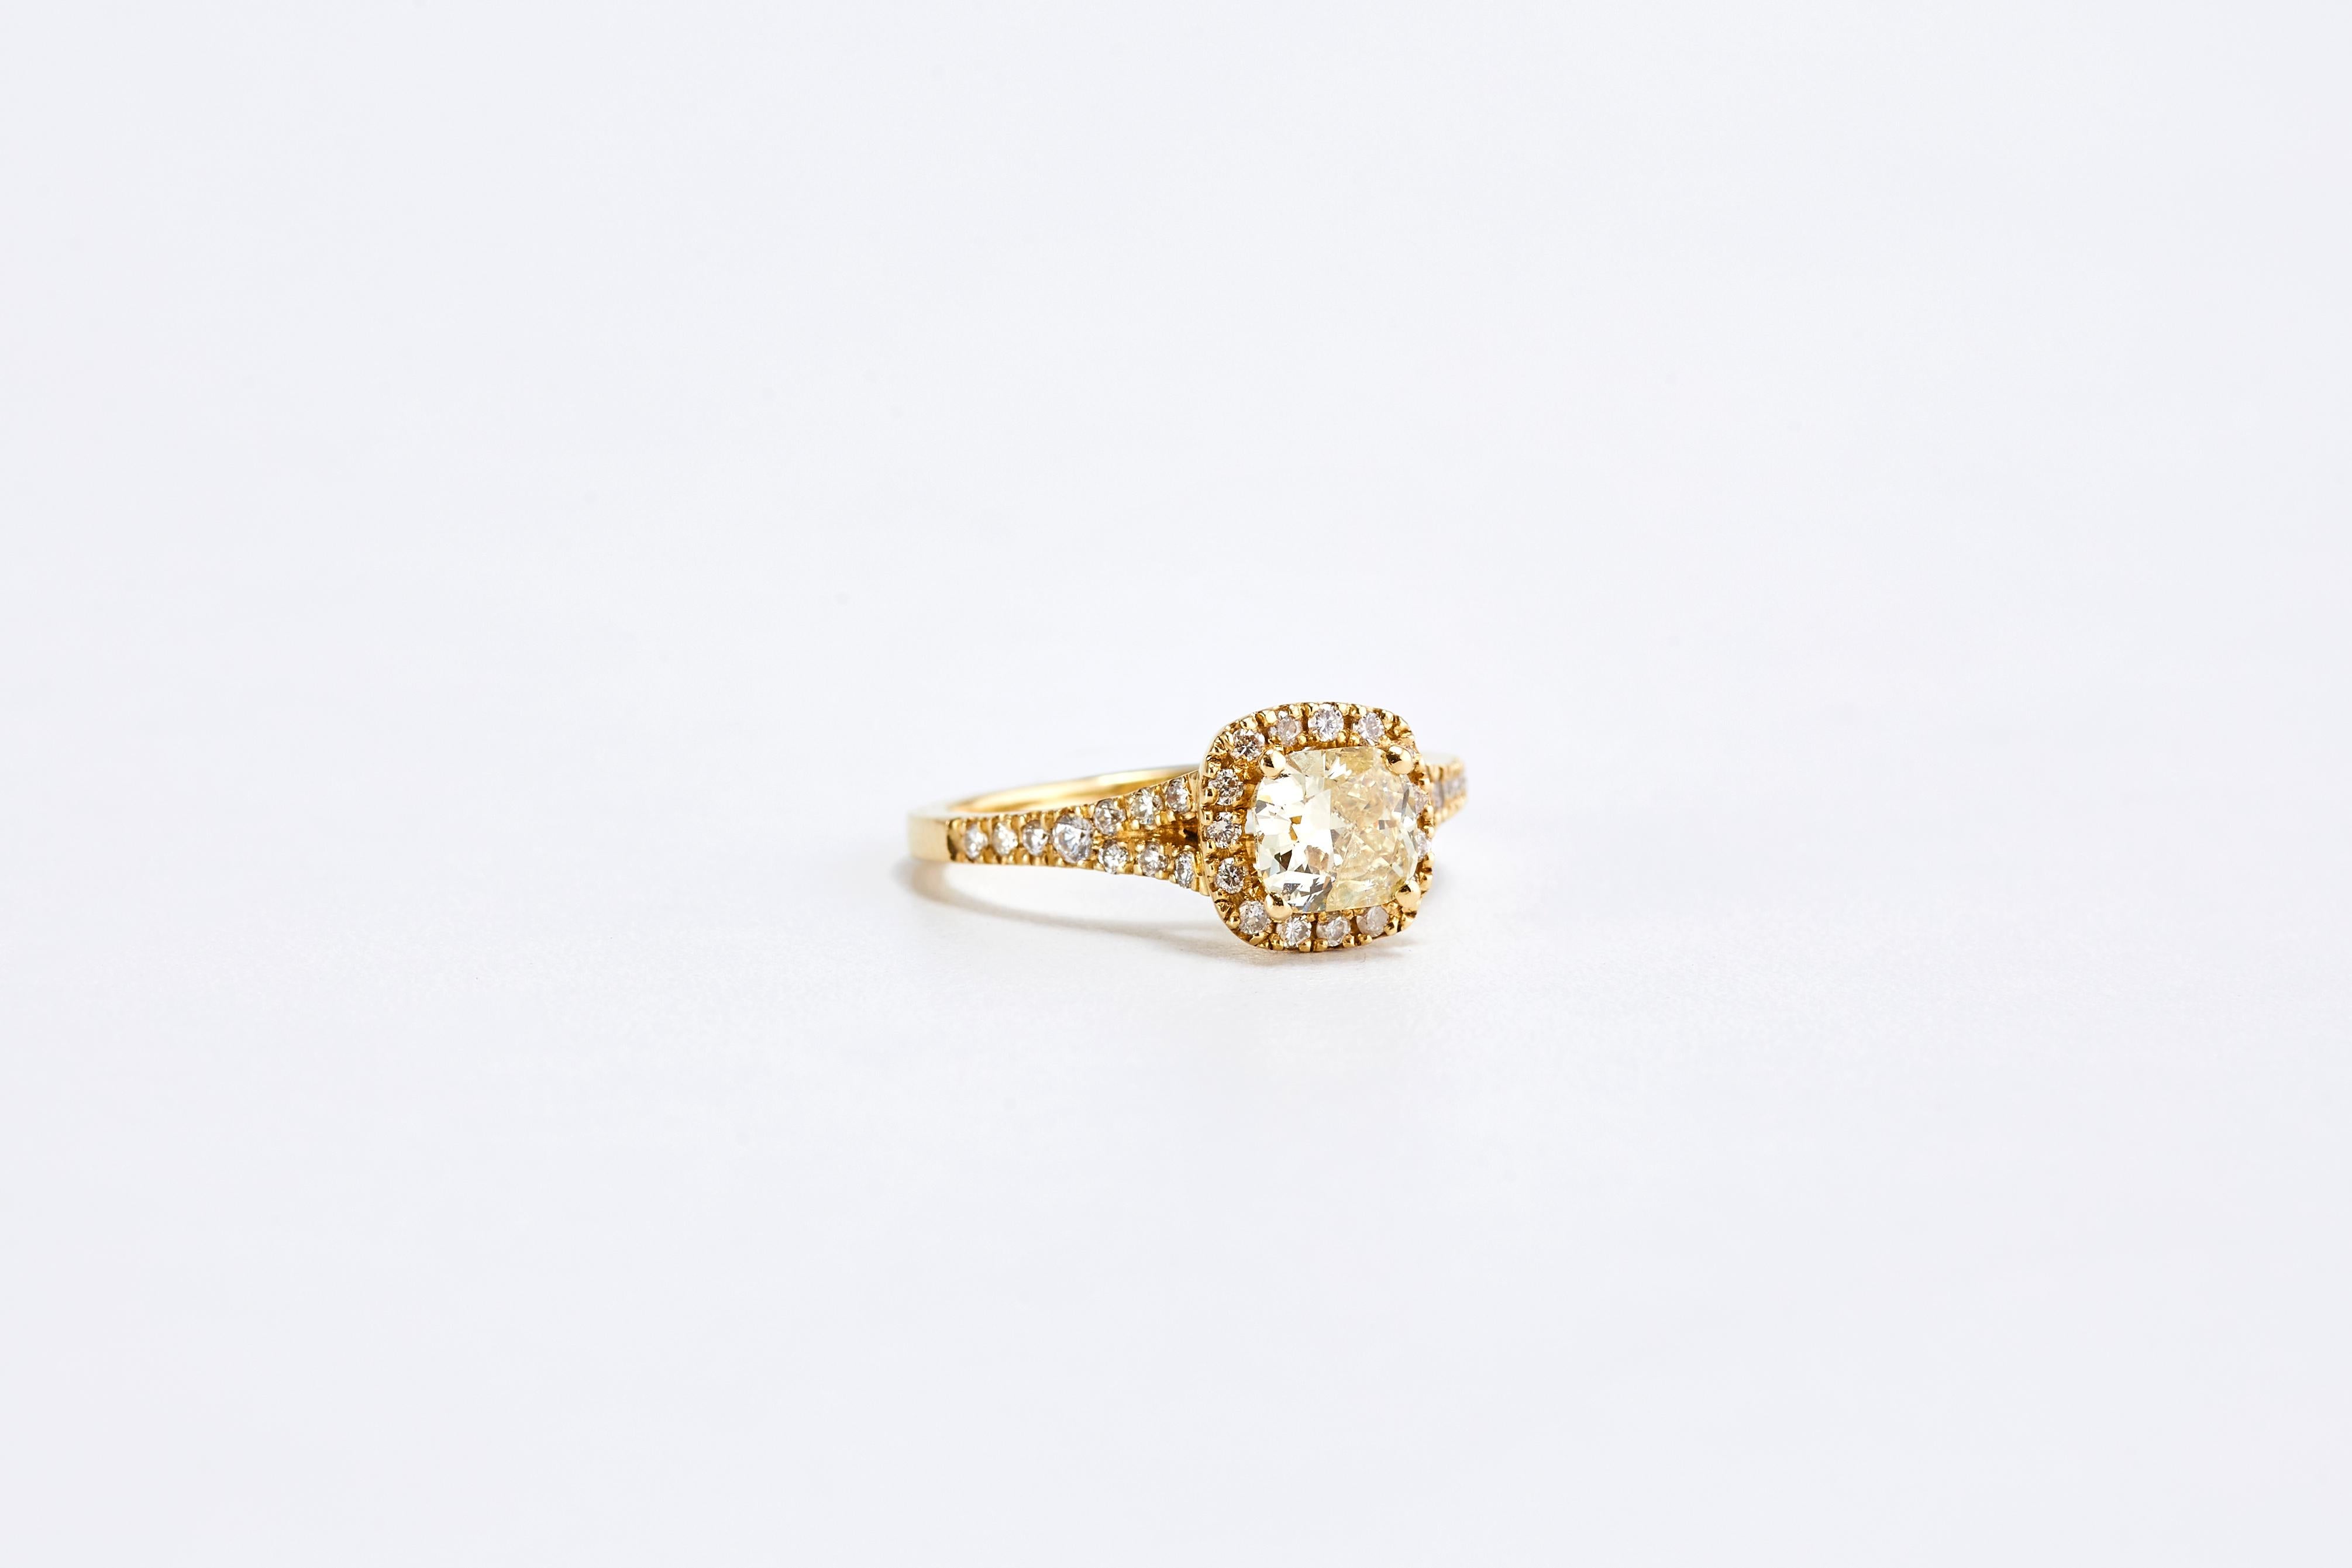 Yellow Gold 0.90 Carat Fancy Yellow Cushion Diamond Engagement Ring with a Halo 

Stunning and fashionable design of a fancy yellow diamond engagement ring.
14 karat yellow gold.
0.90 carat Center diamond fancy yellow color. Diamonds halo and pave